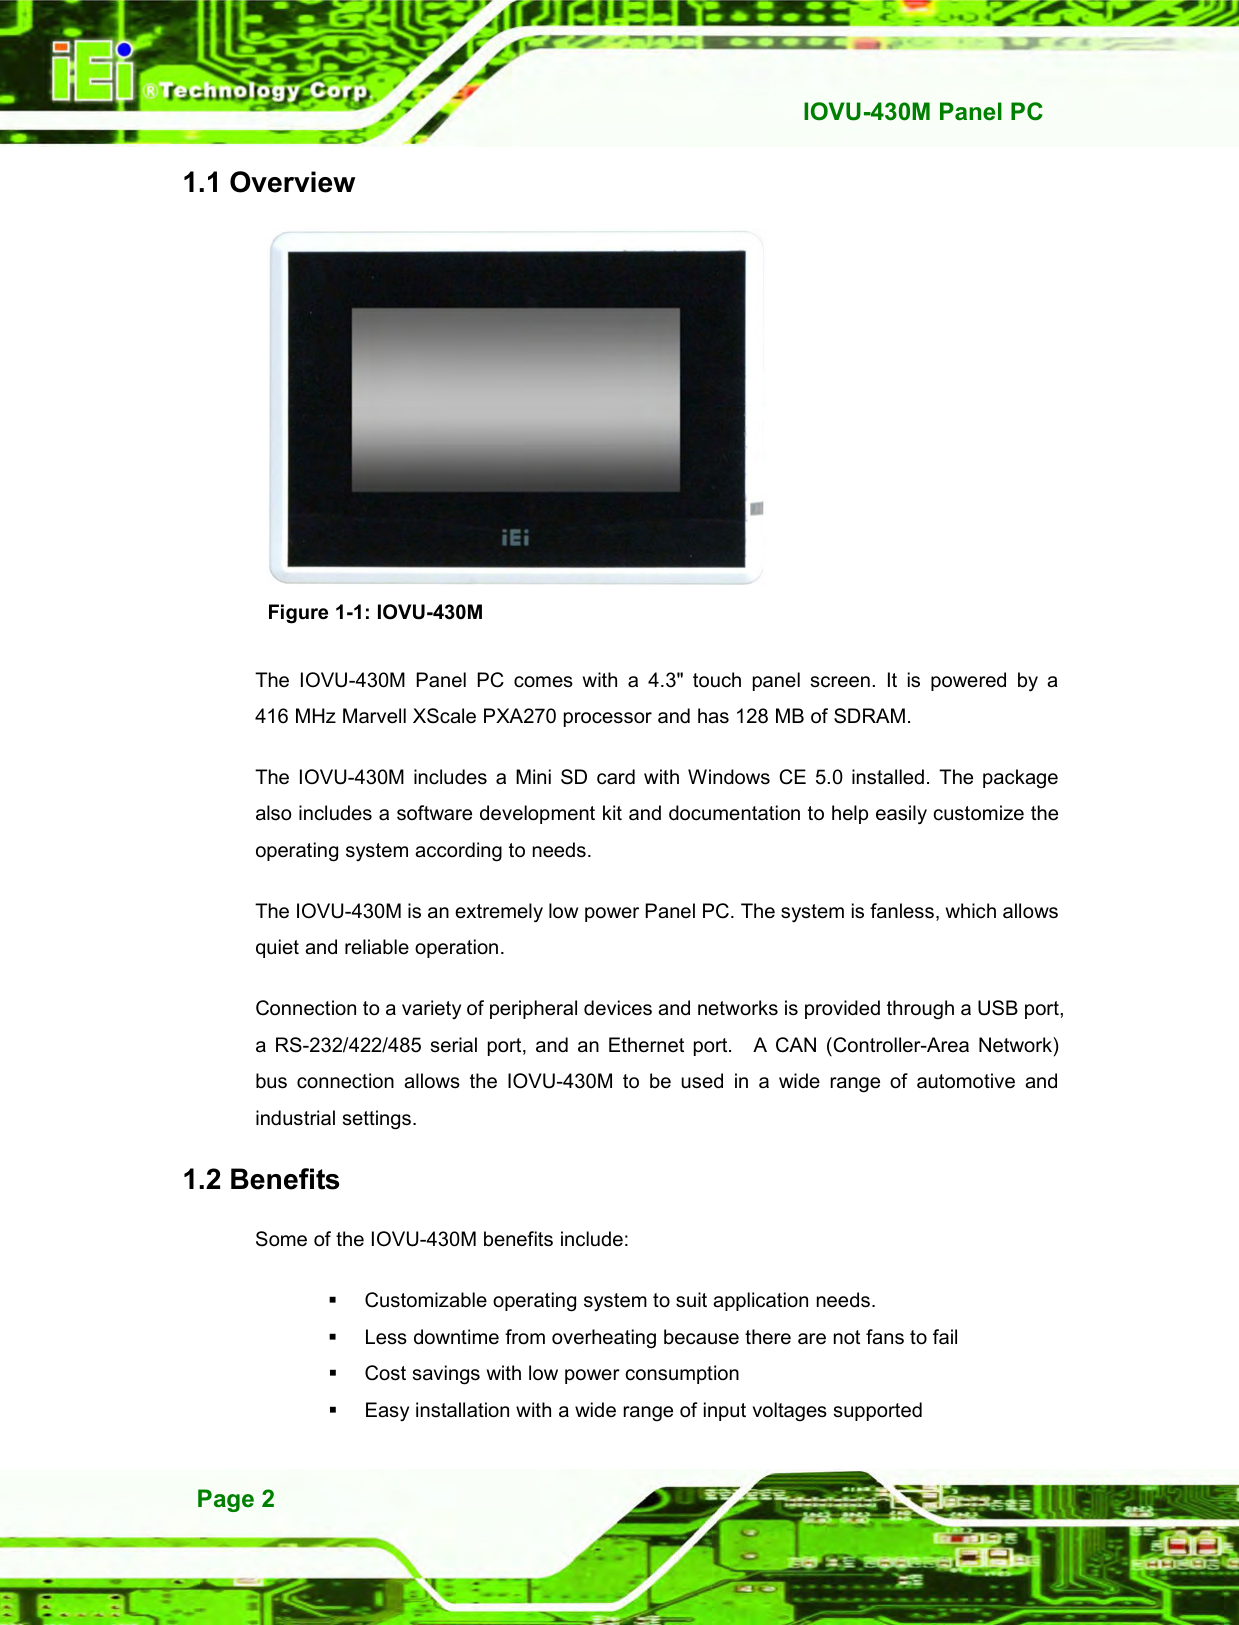   IOVU-430M Panel PC Page 2 1.1 Overview  Figure 1-1: IOVU-430M The  IOVU-430M  Panel  PC  comes  with  a  4.3&quot;  touch  panel  screen.  It  is  powered  by  a 416 MHz Marvell XScale PXA270 processor and has 128 MB of SDRAM. The  IOVU-430M  includes  a  Mini  SD  card with  Windows  CE 5.0  installed.  The package also includes a software development kit and documentation to help easily customize the operating system according to needs. The IOVU-430M is an extremely low power Panel PC. The system is fanless, which allows quiet and reliable operation.     Connection to a variety of peripheral devices and networks is provided through a USB port, a  RS-232/422/485  serial  port,  and  an  Ethernet  port.    A  CAN (Controller-Area  Network) bus  connection  allows  the  IOVU-430M  to  be  used  in  a  wide  range  of  automotive  and industrial settings. 1.2 Benefits Some of the IOVU-430M benefits include:   Customizable operating system to suit application needs.   Less downtime from overheating because there are not fans to fail   Cost savings with low power consumption   Easy installation with a wide range of input voltages supported 